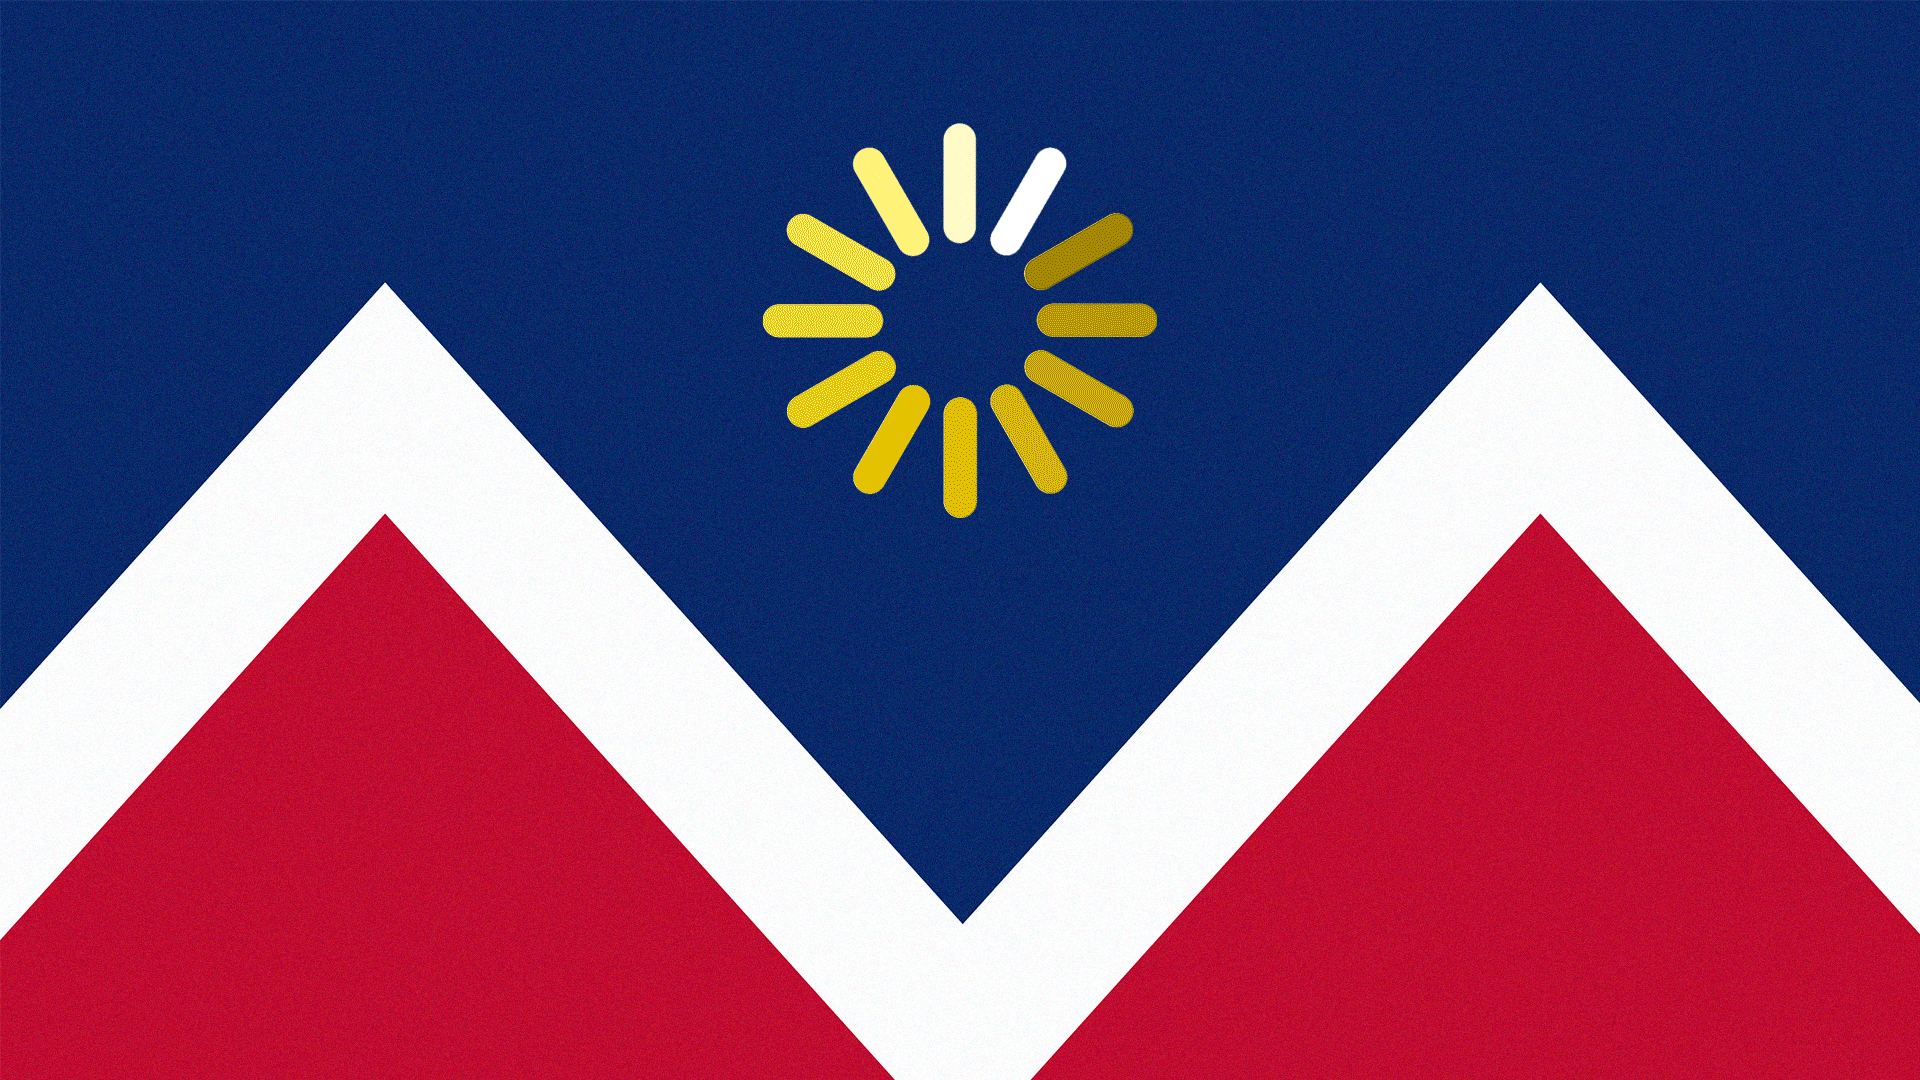 Illustration of the Denver flag with a loading symbol instead of the sun.